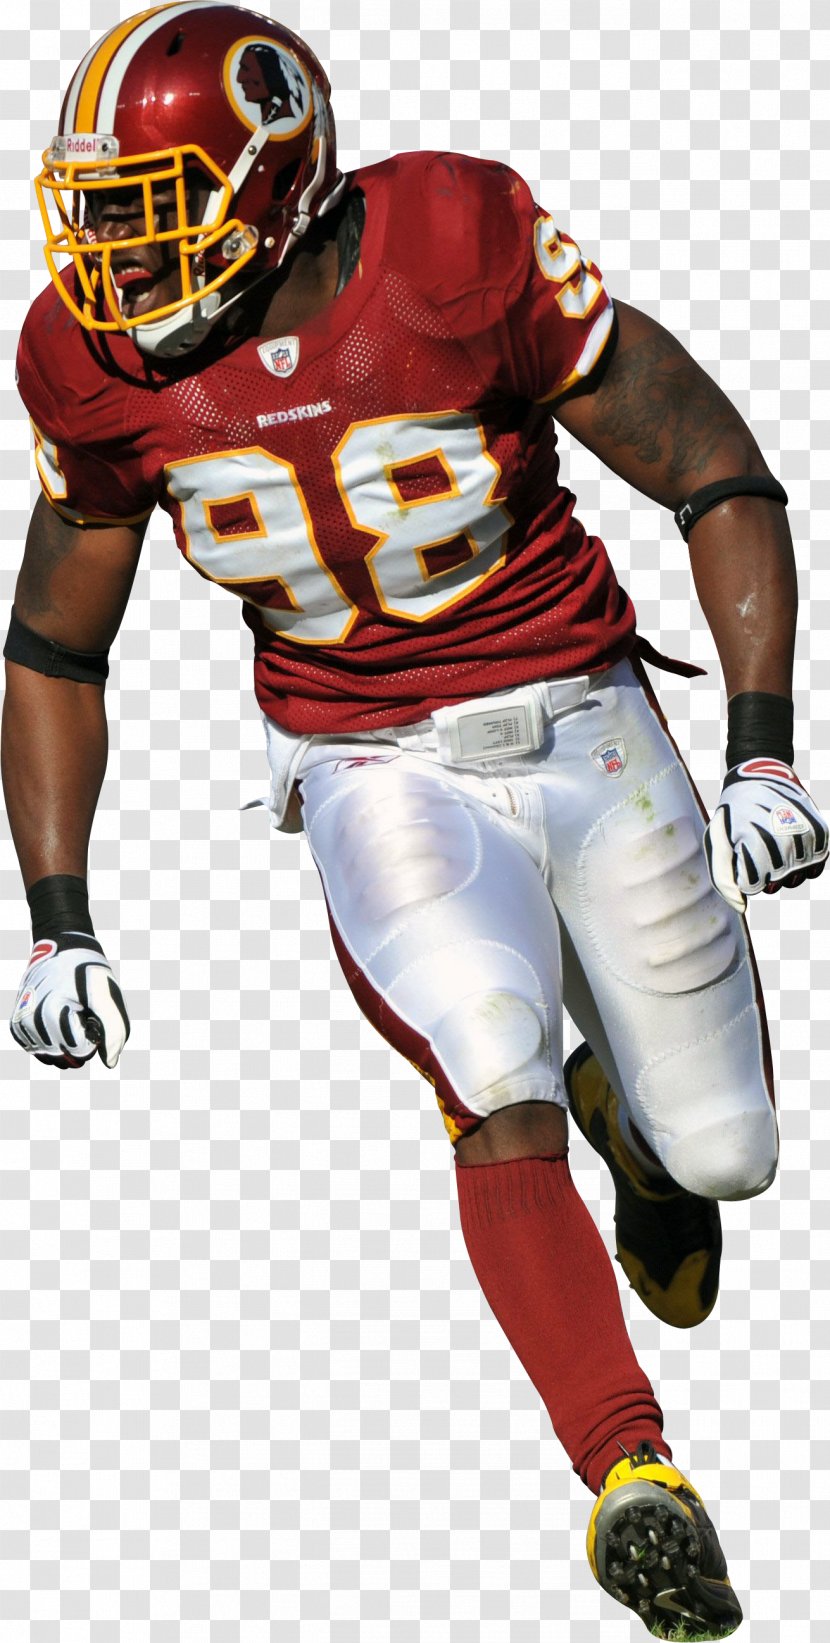 Washington Redskins Protective Gear In Sports American Football - Baseball Equipment Transparent PNG